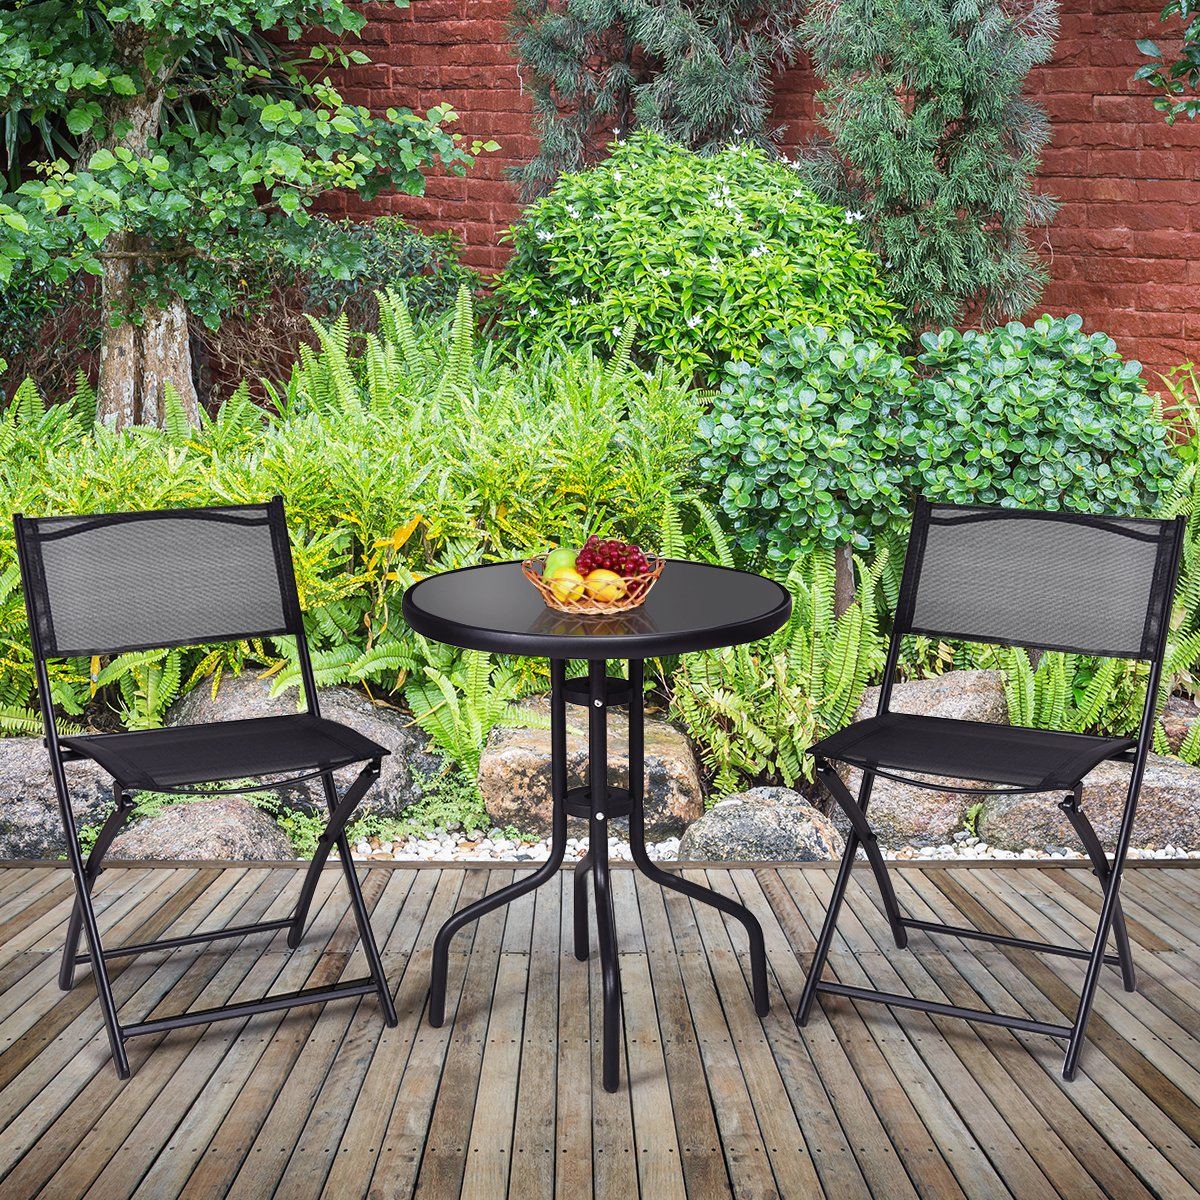 Patio Furniture Collections